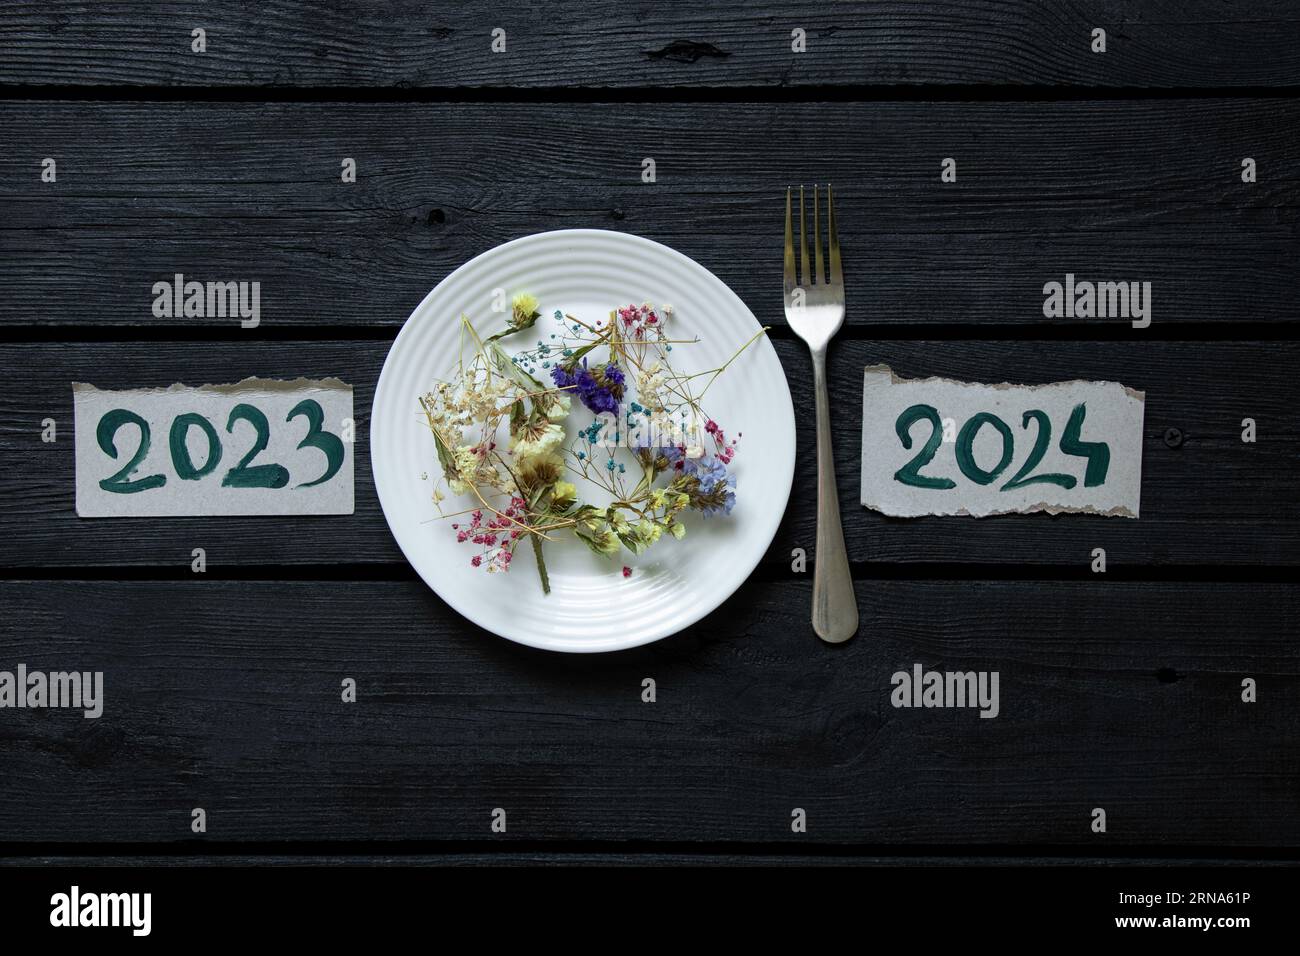 Postcards with the drawn text 2023 2024, and between them lies a plate of flowers and a fork, Happy New Year, festive table, holiday Stock Photo